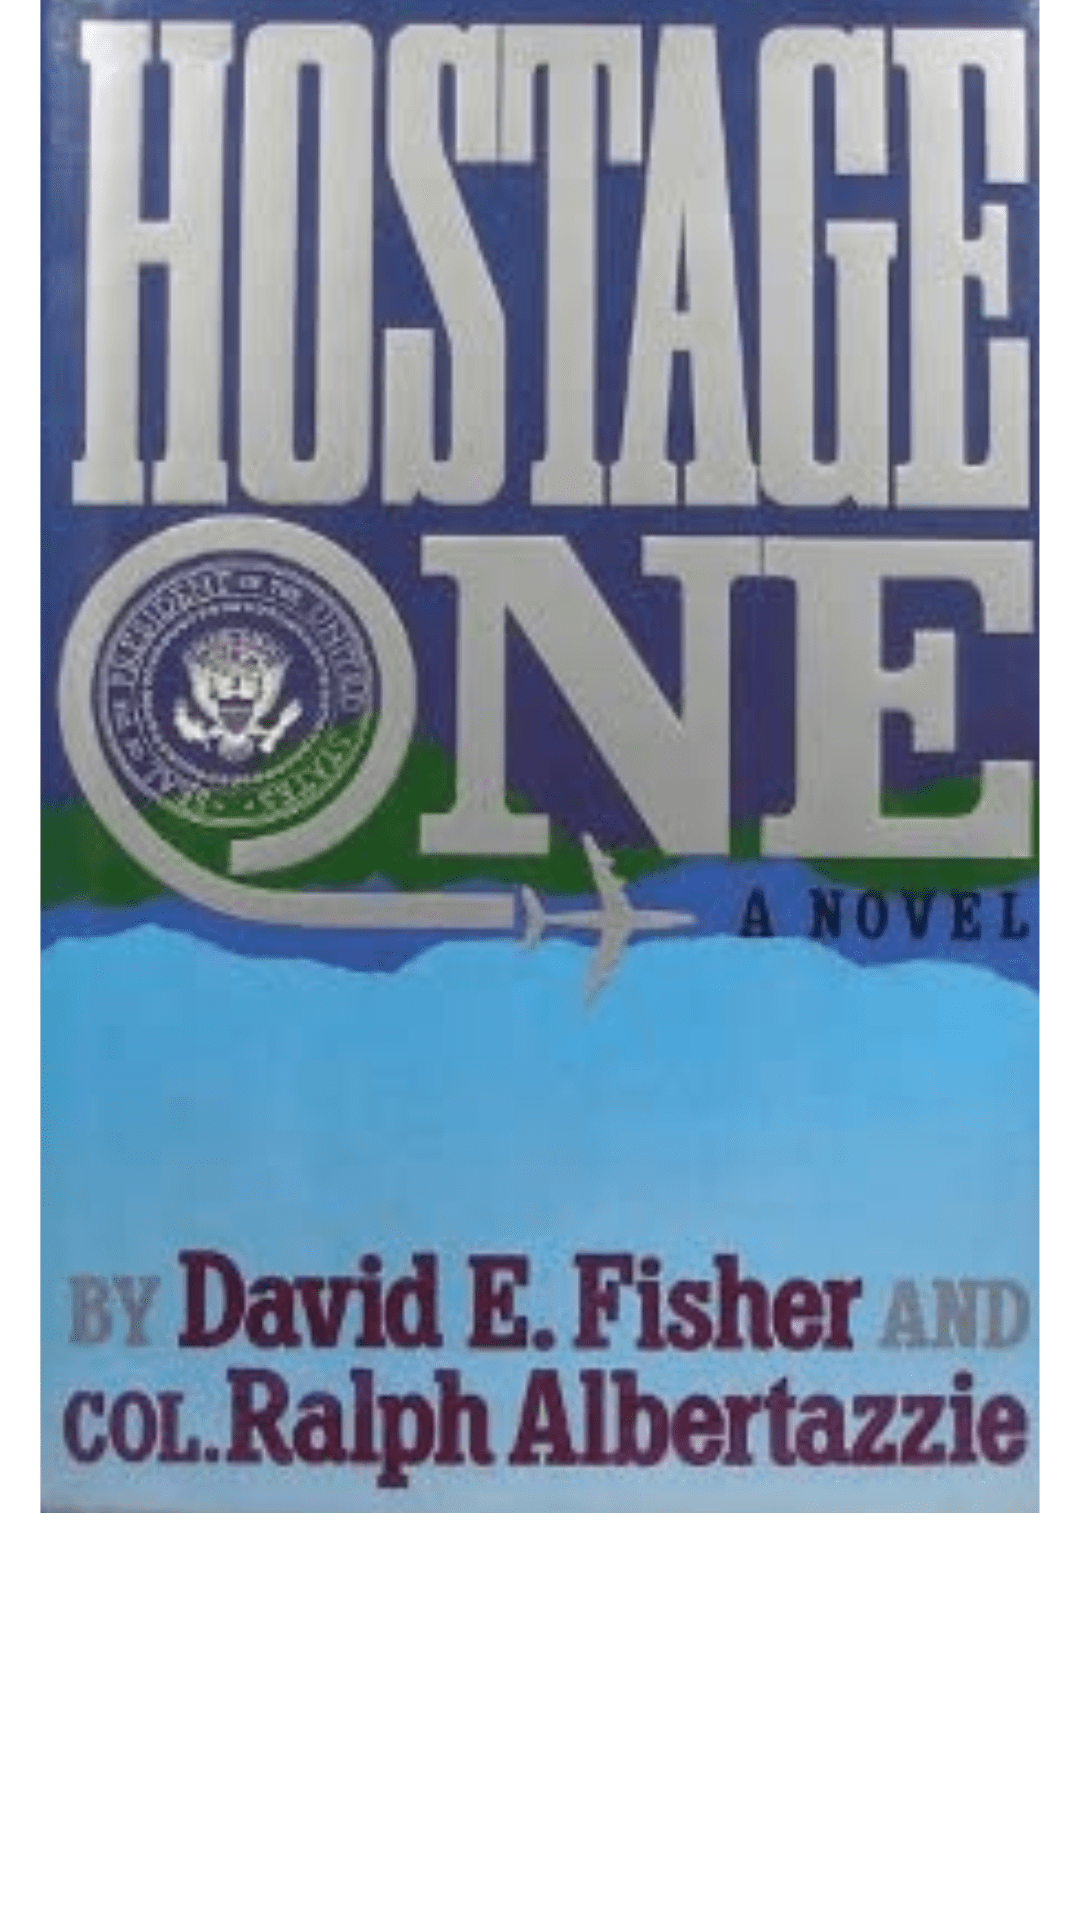 Hostage One by David Fisher